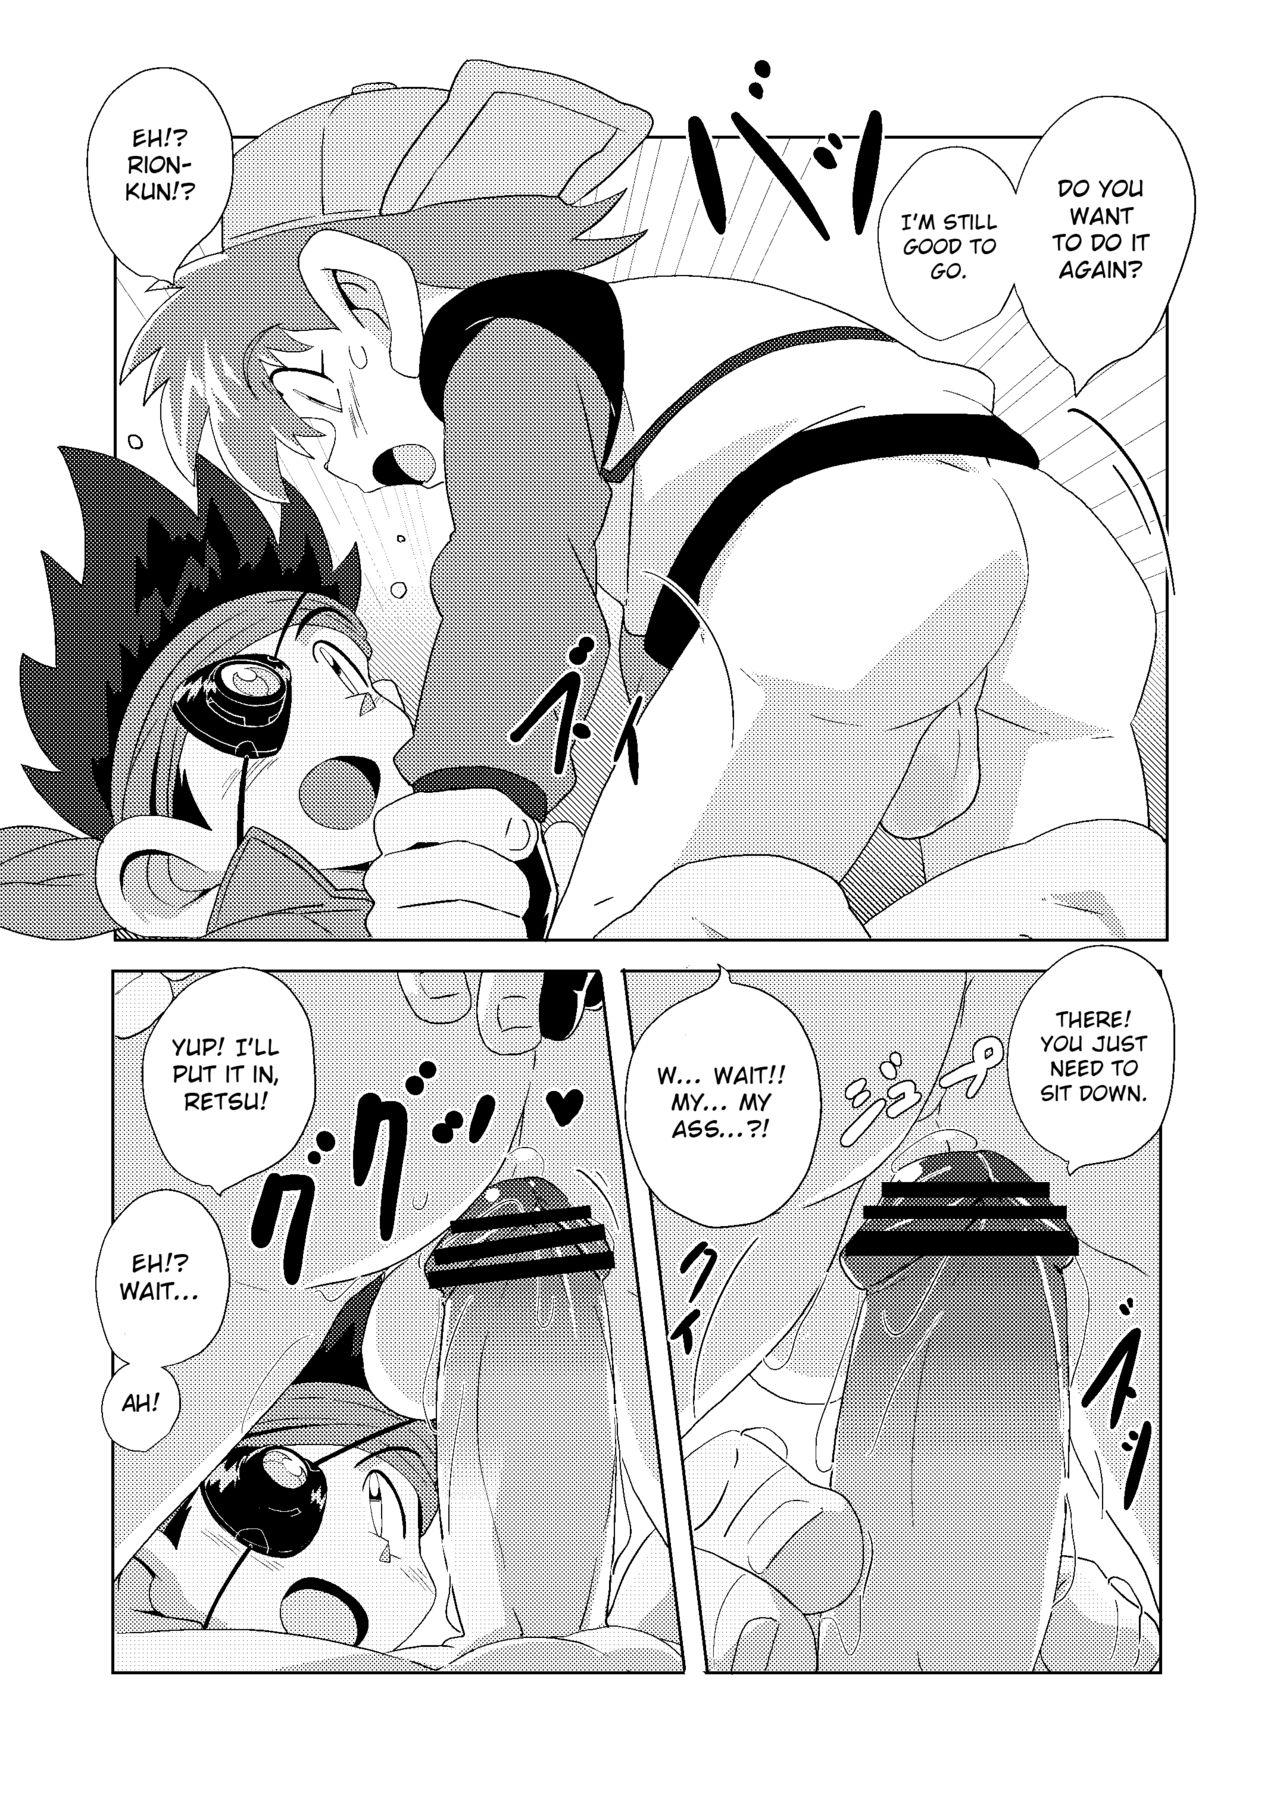 Show Chase the Wind - Bakusou kyoudai lets and go Nudist - Page 10